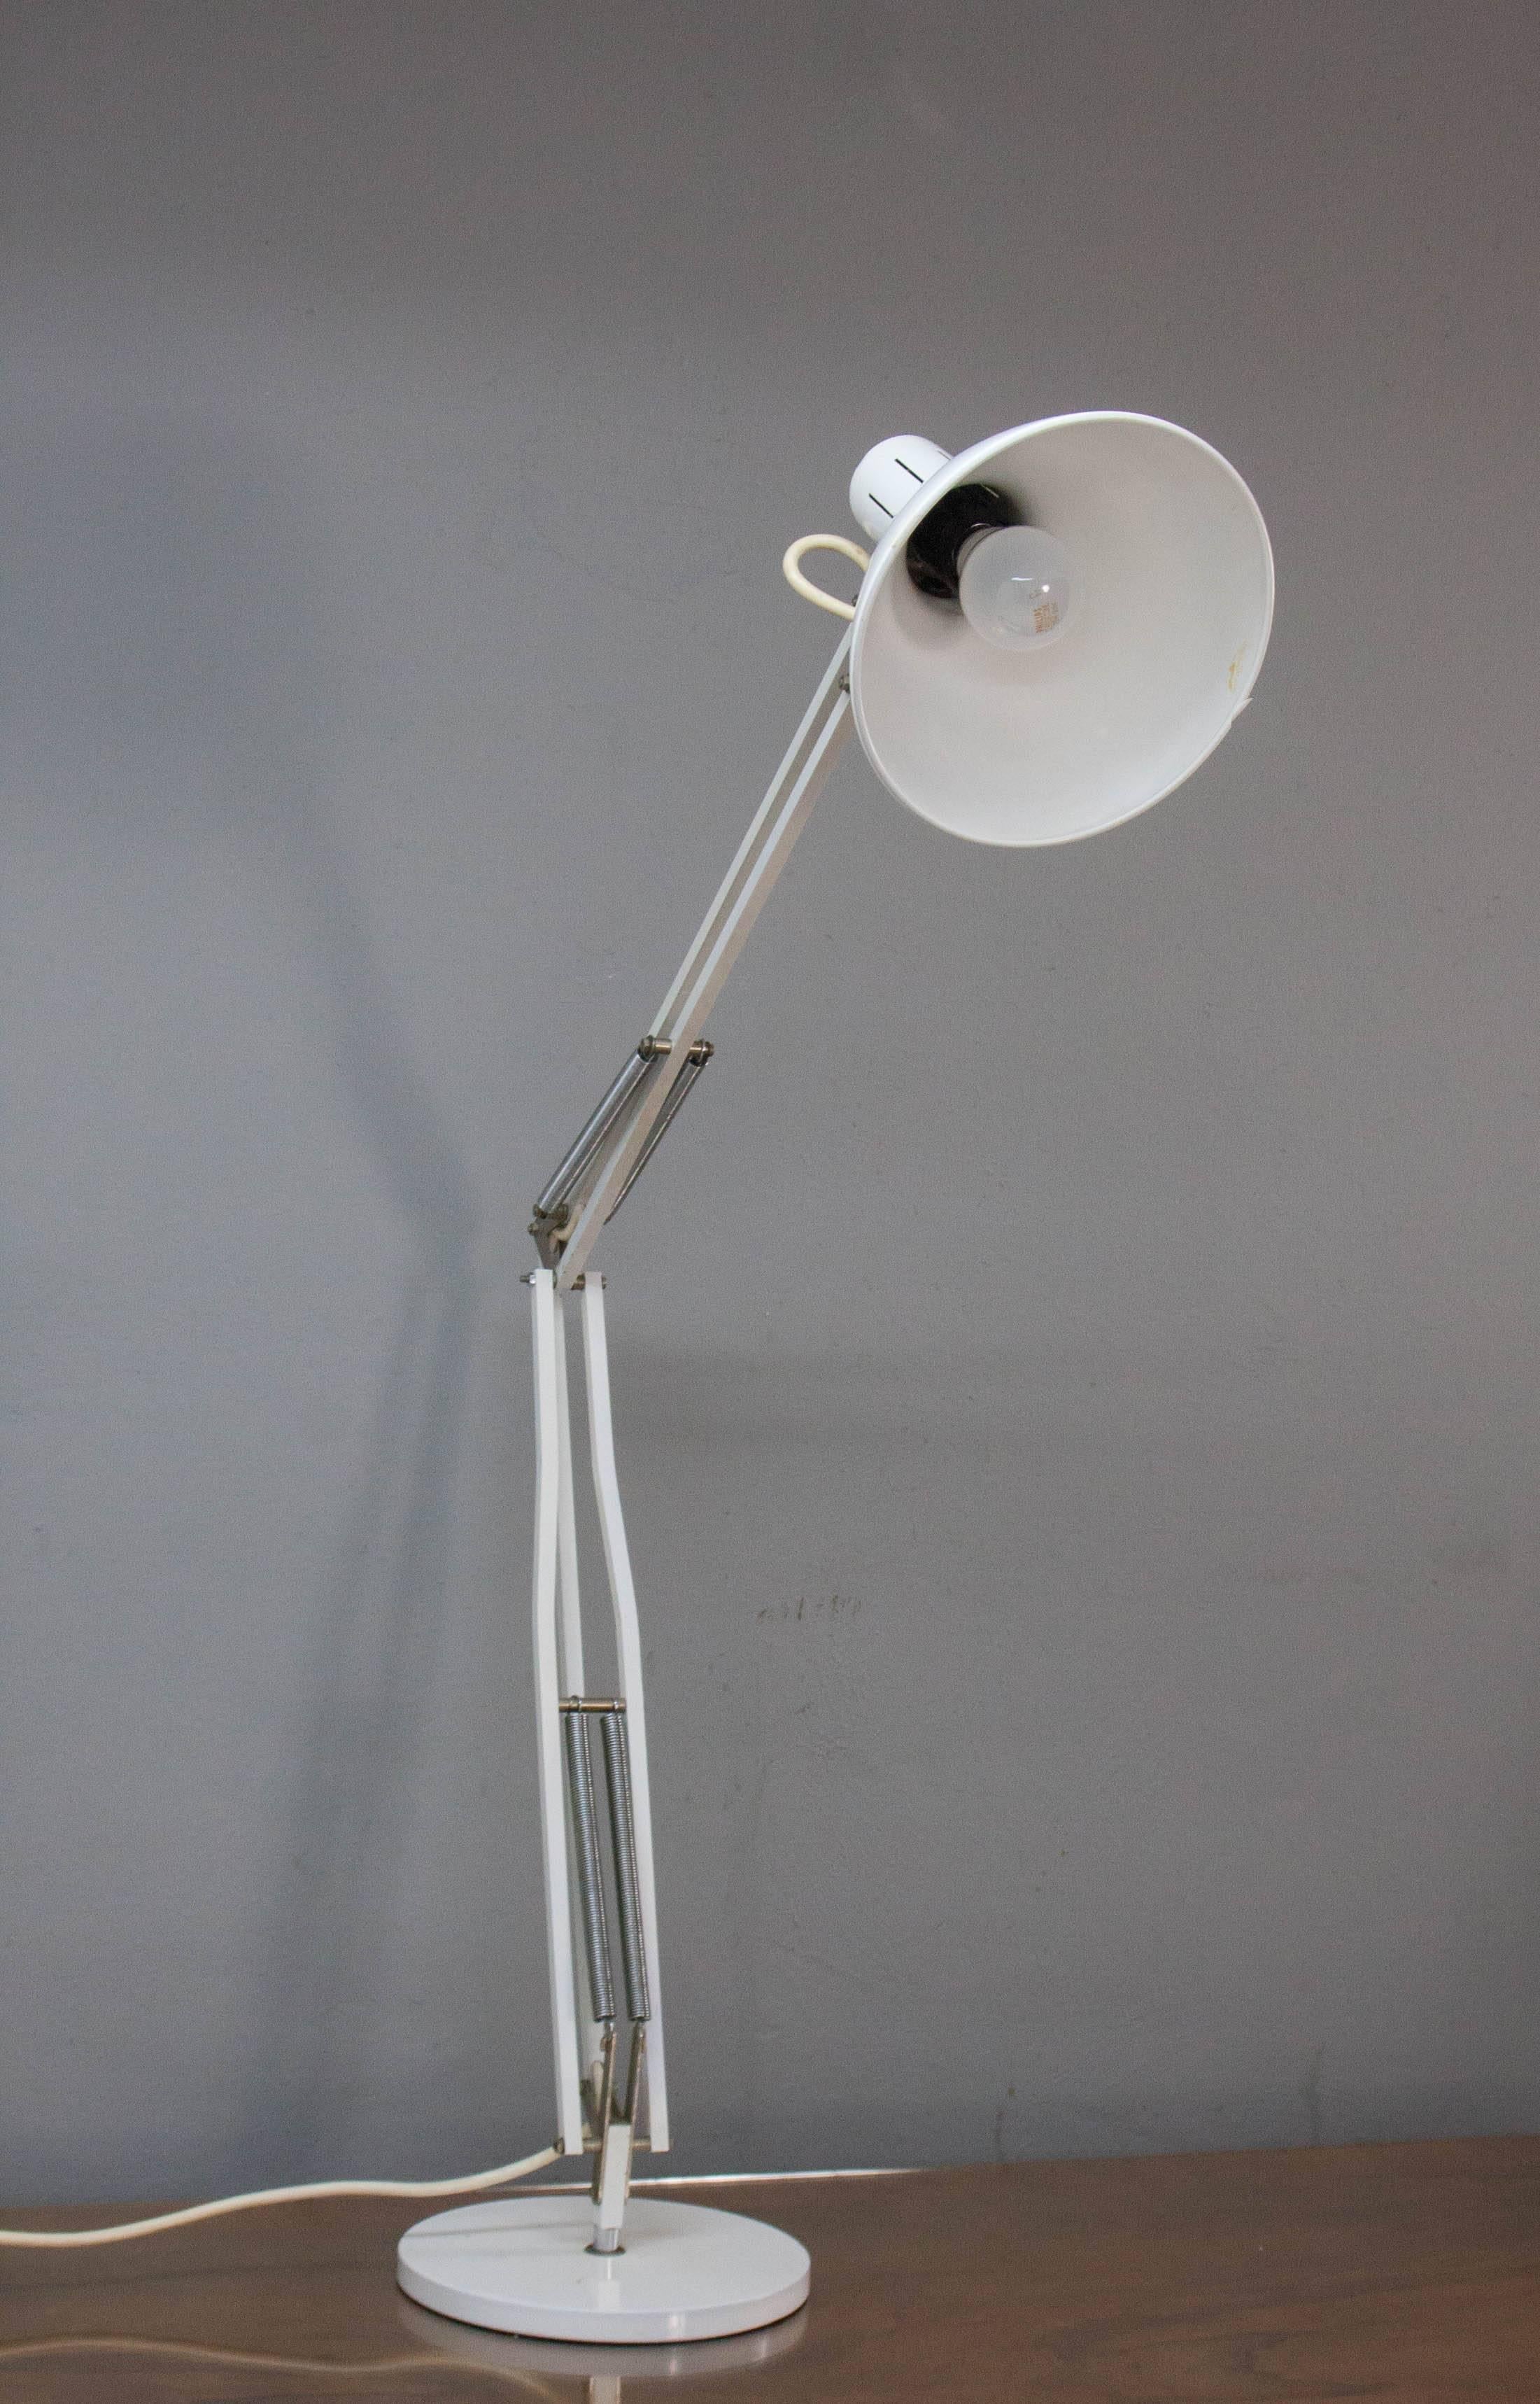 Mid-Century Modern Desk Lamp 'Terry 2' by H. Th. J. A. Busquet for Hala Zeist, 1950s